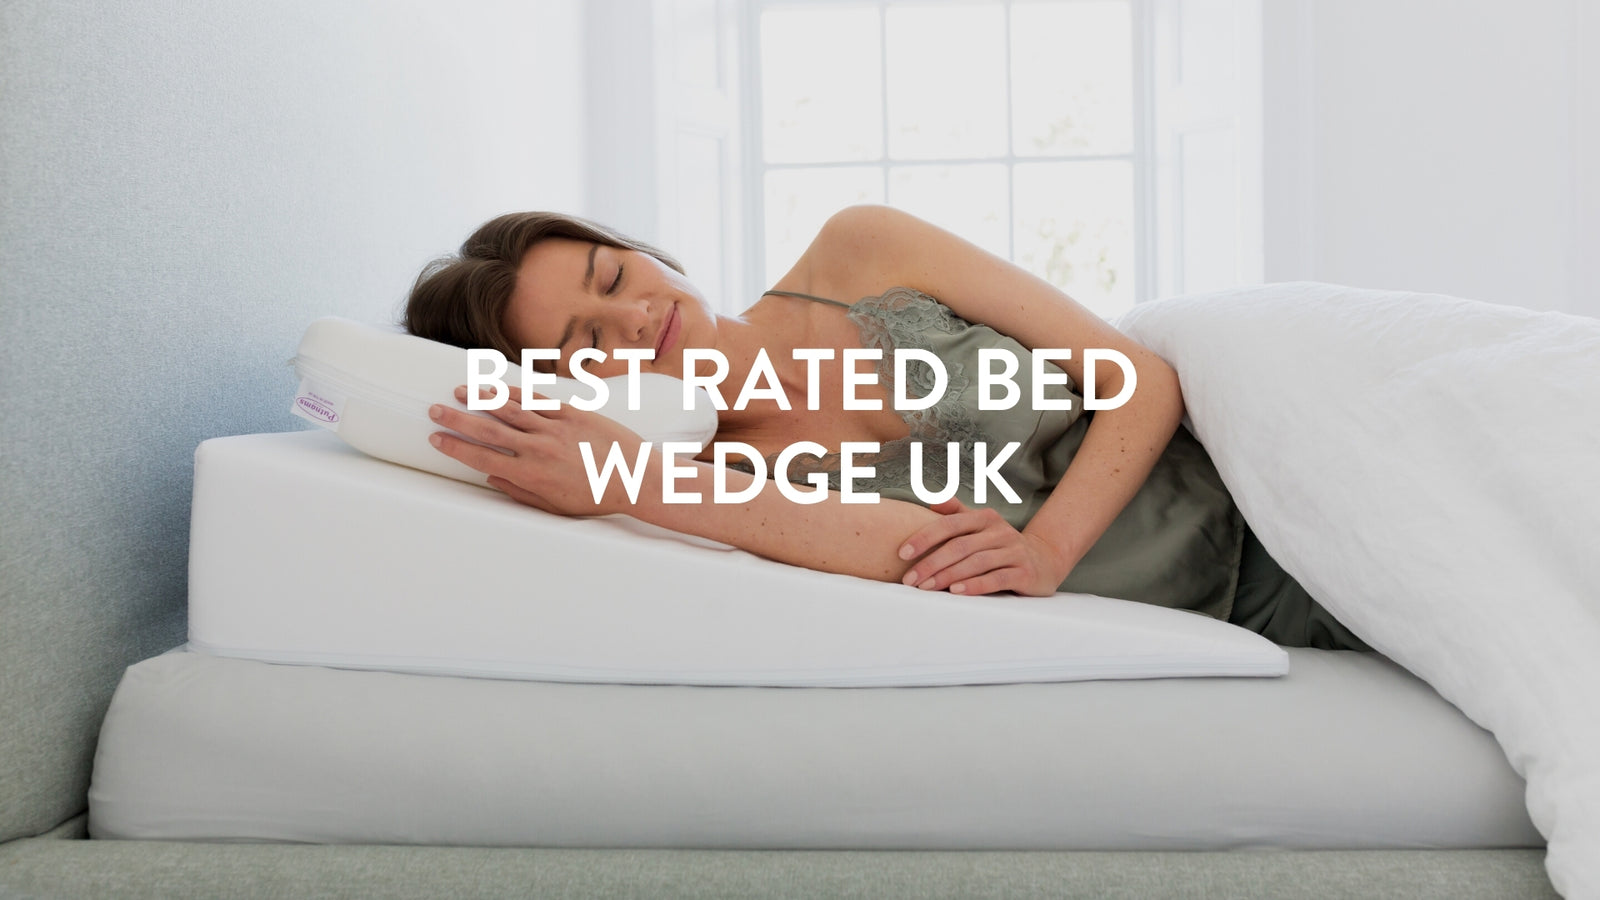 Best rated bed wedge UK